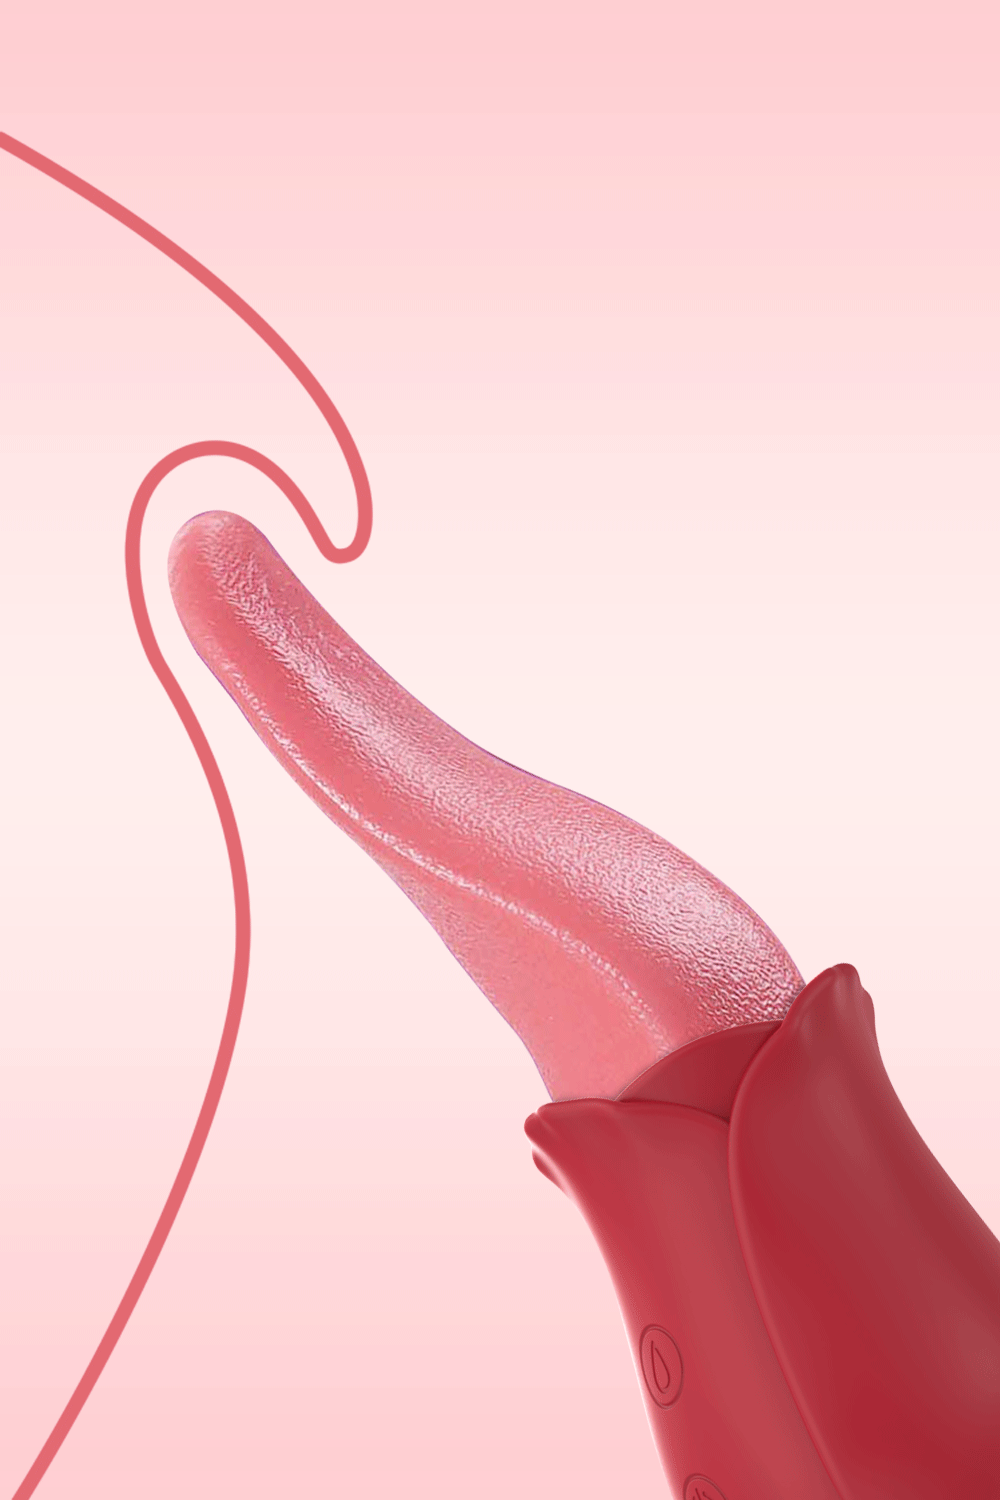 Super Realistic Soft Tongue Licker with Rose Vibrating Base S5